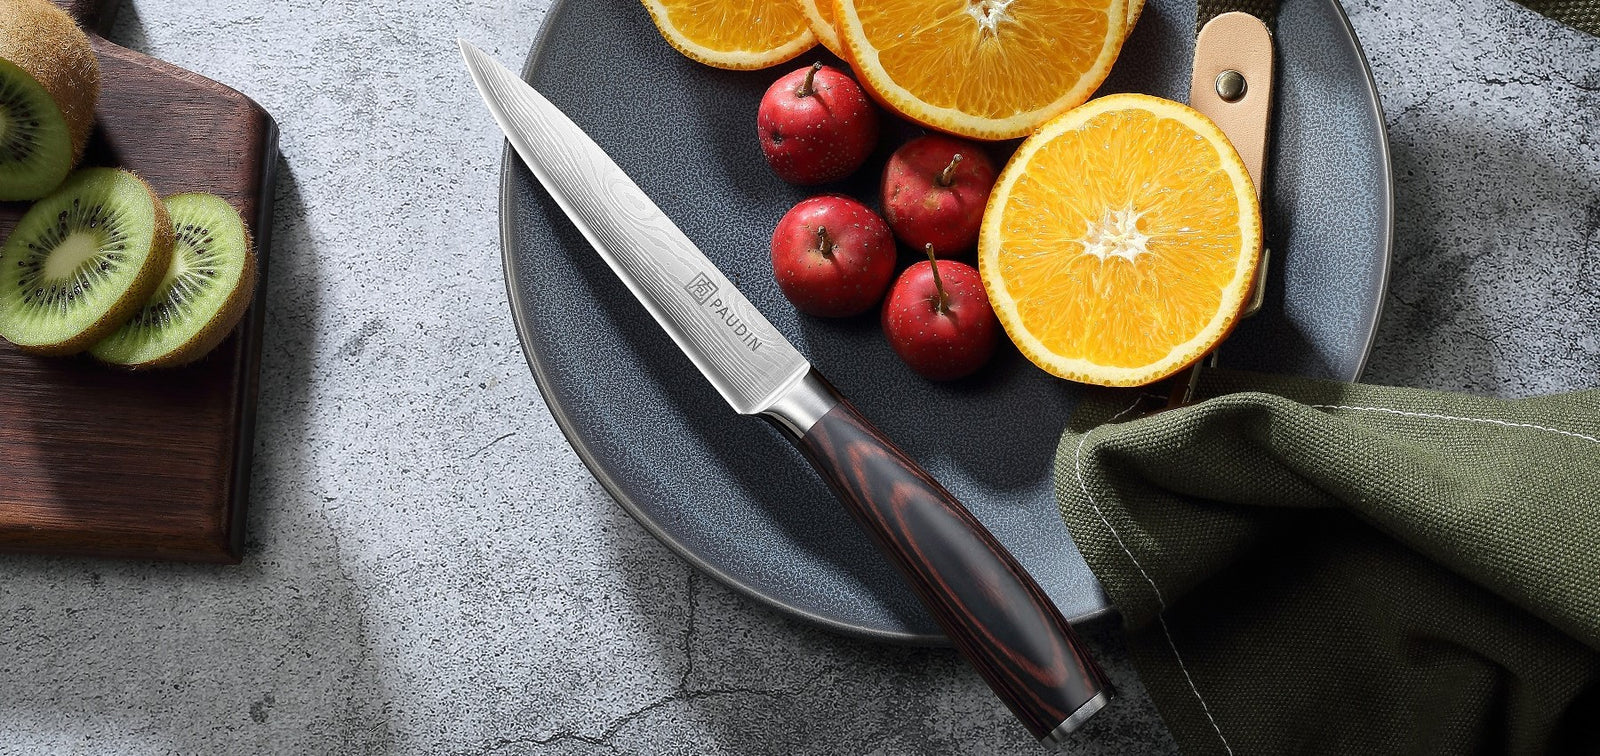 Plume Luxe 8 Chef's Knife - Paudin